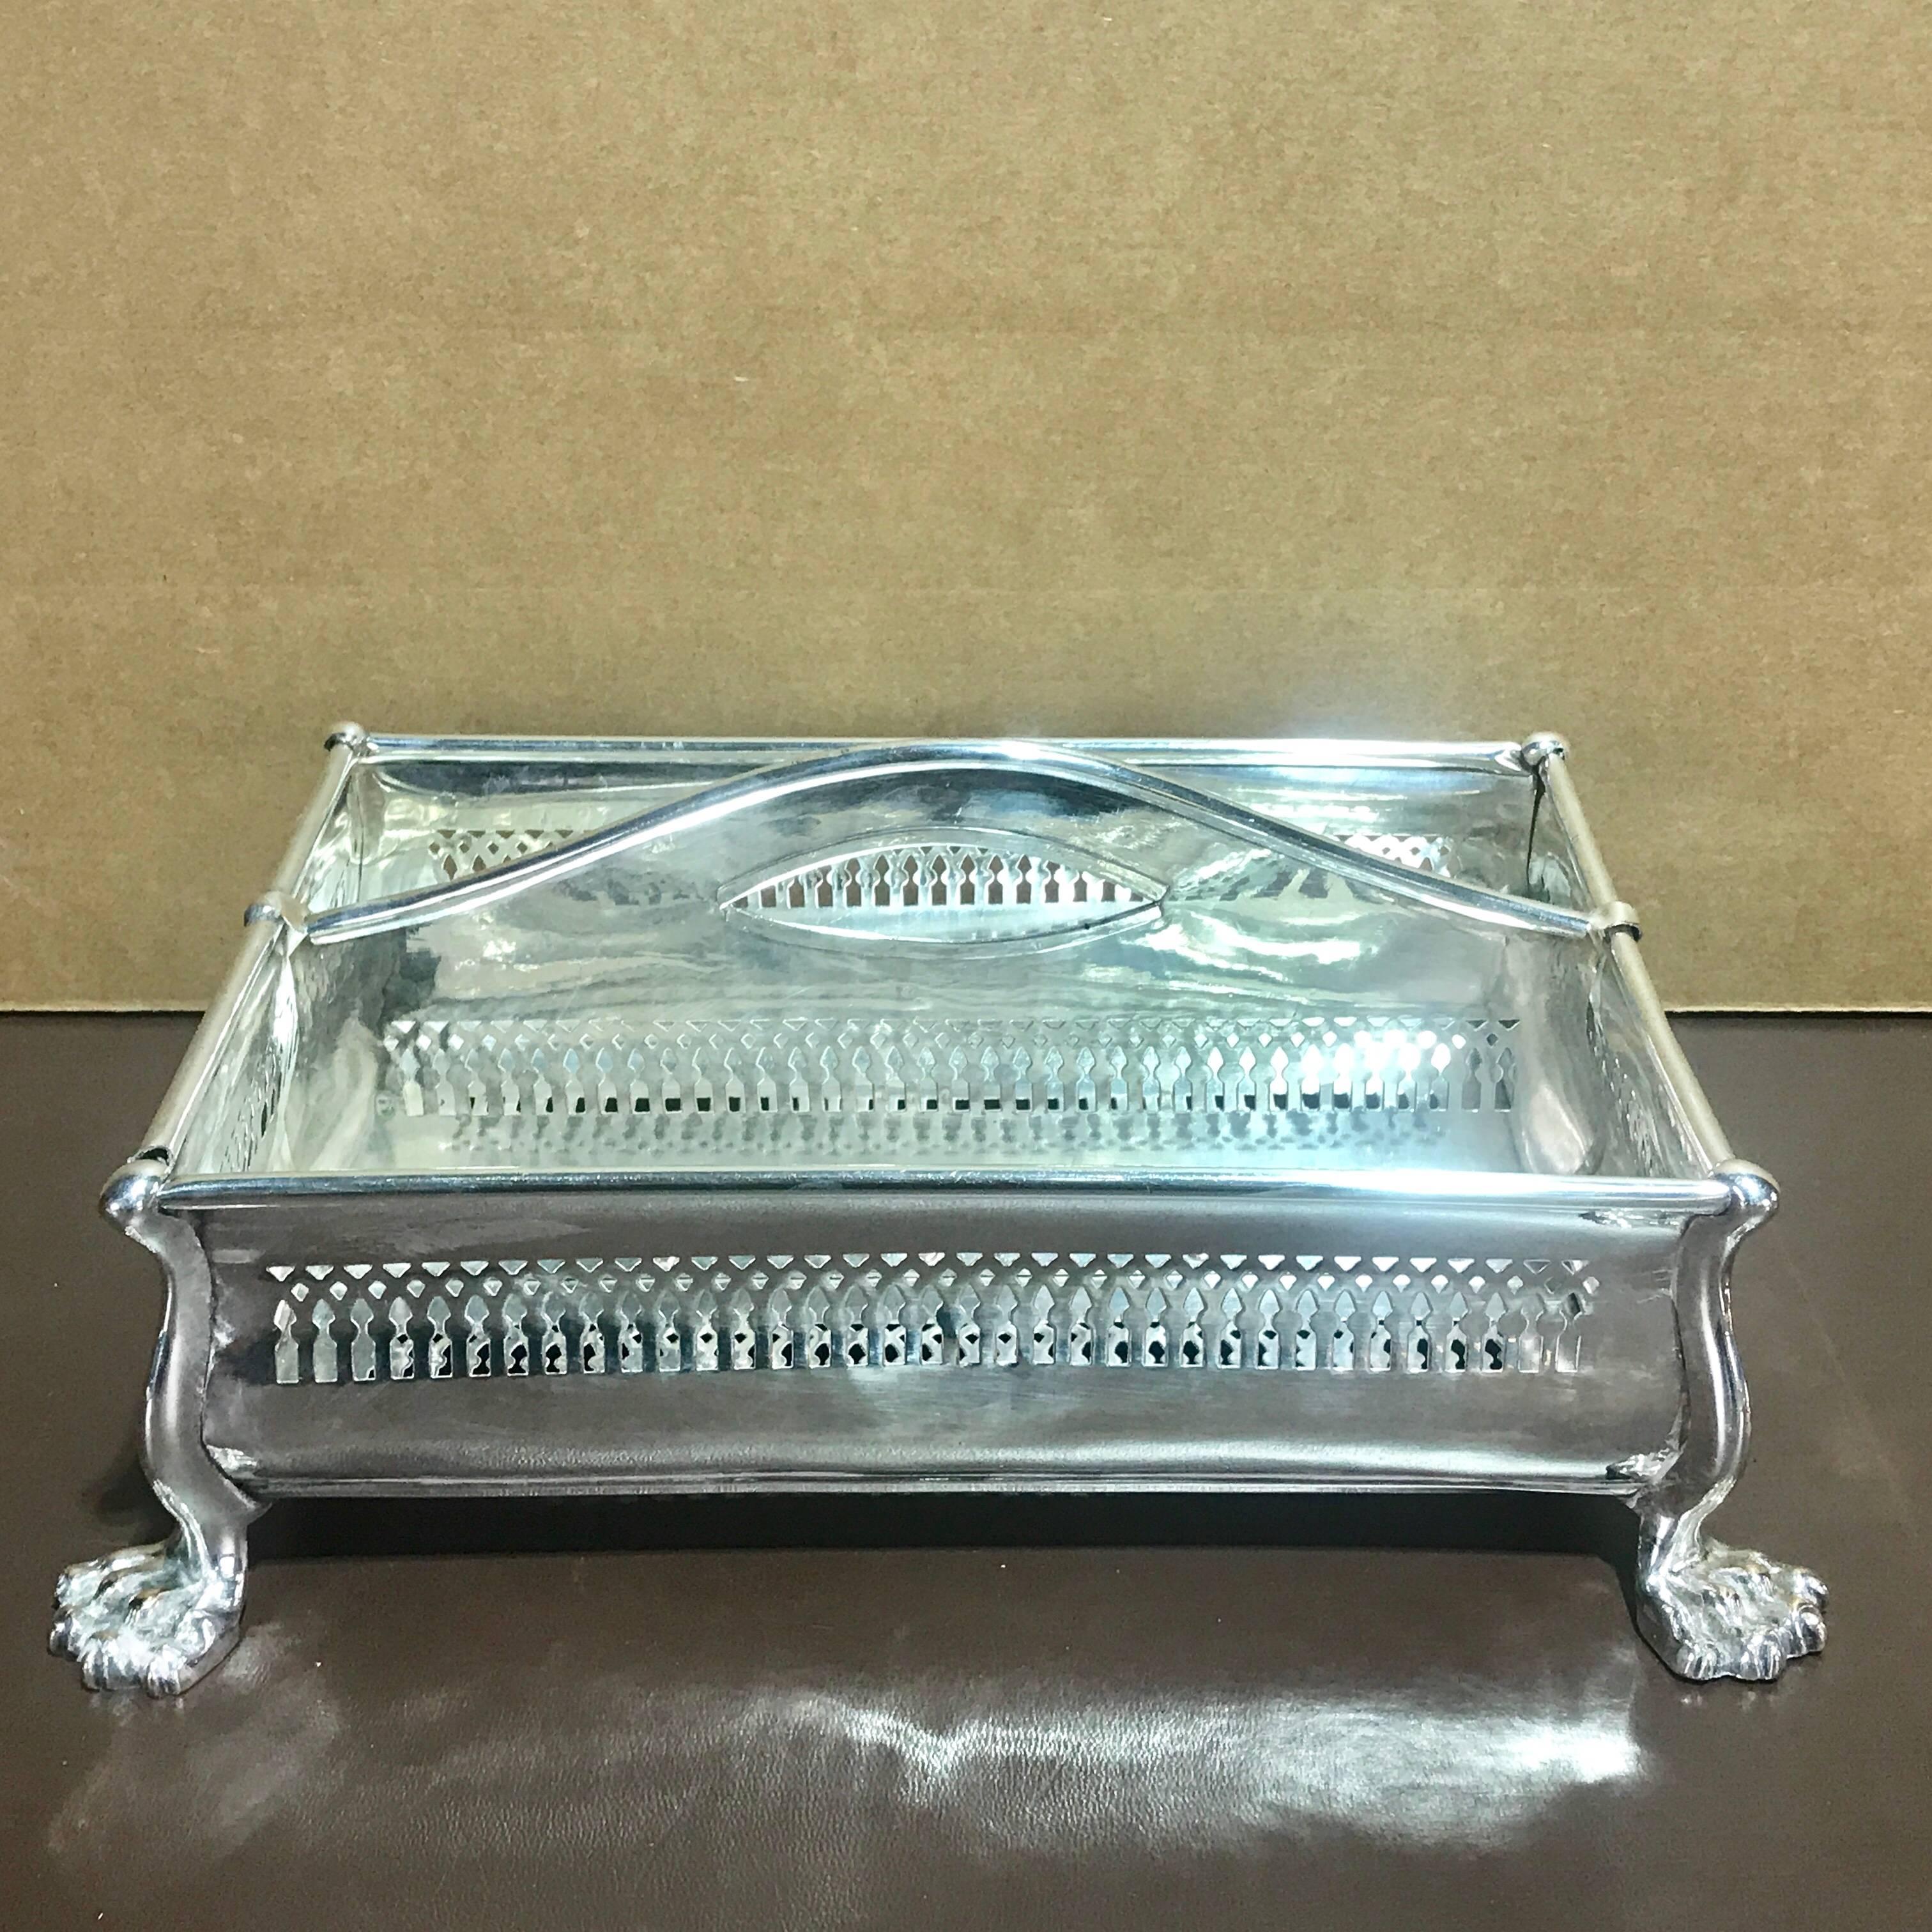 Sheffield plate cutlery box, rare form, Sheffield plate with 